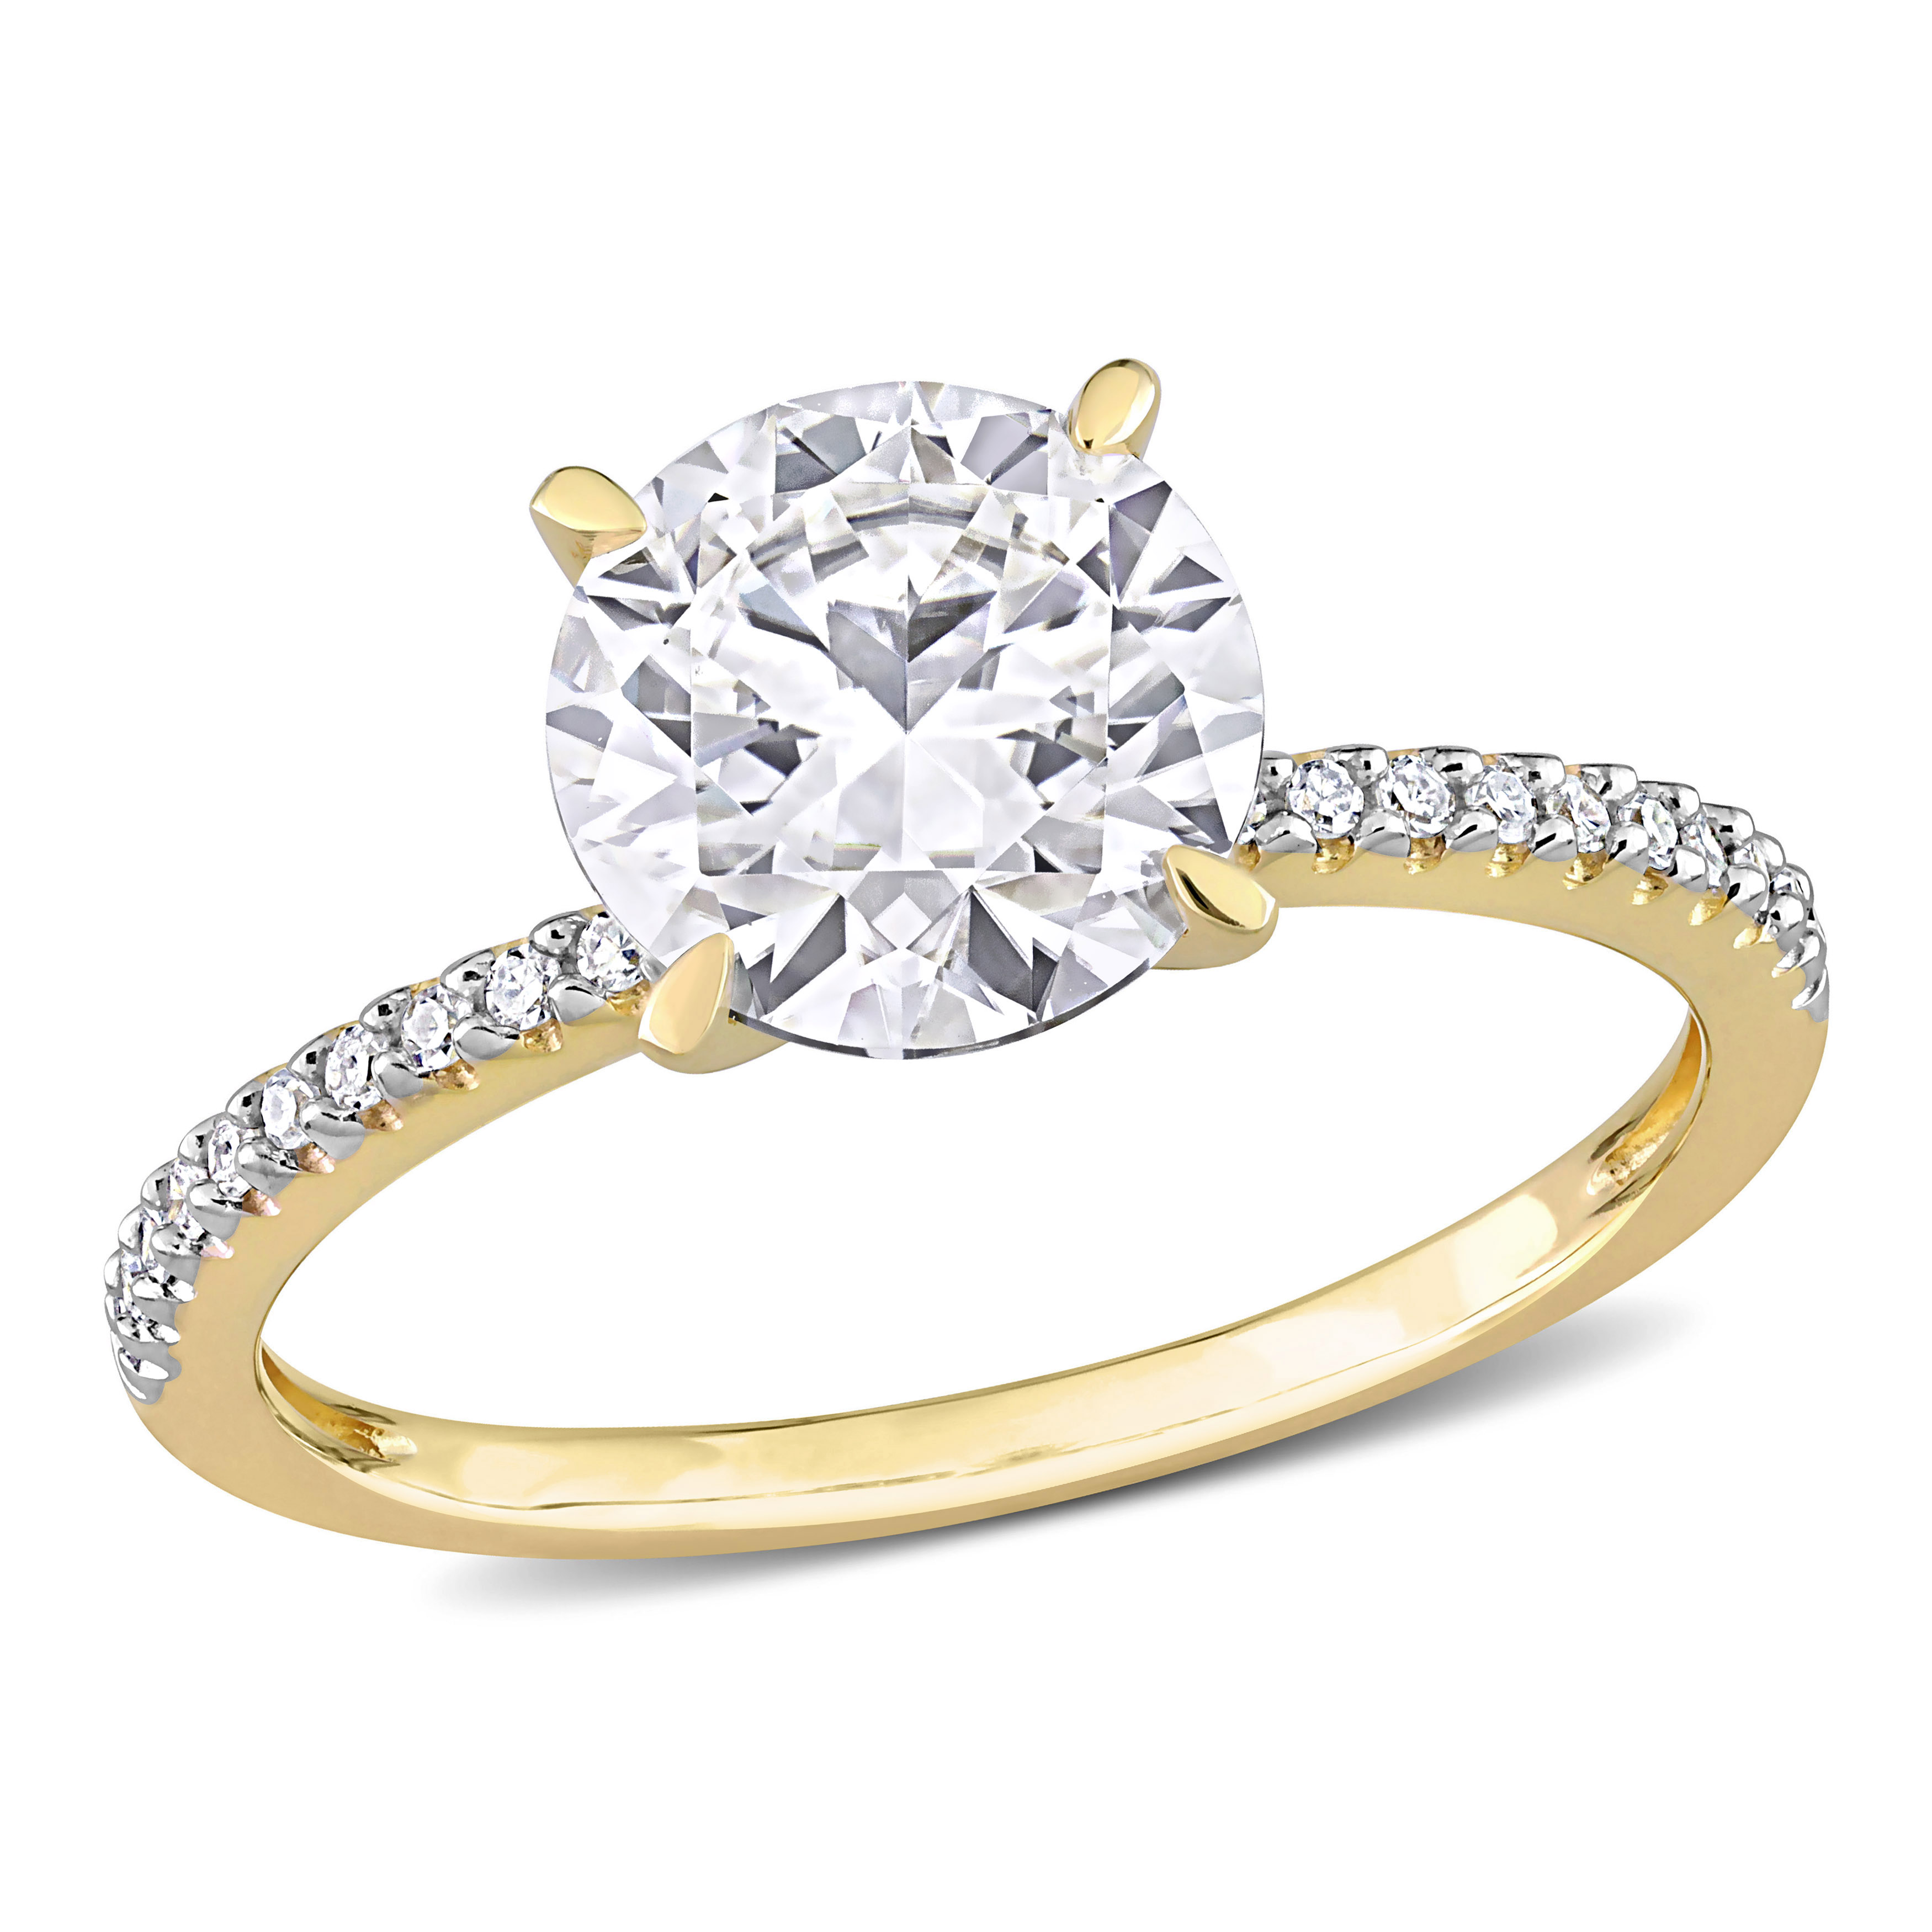 1 4/5 CT DEW Created Moissanite and 1/10 CT TDW Diamond Engagement Ring in 14k Yellow Gold